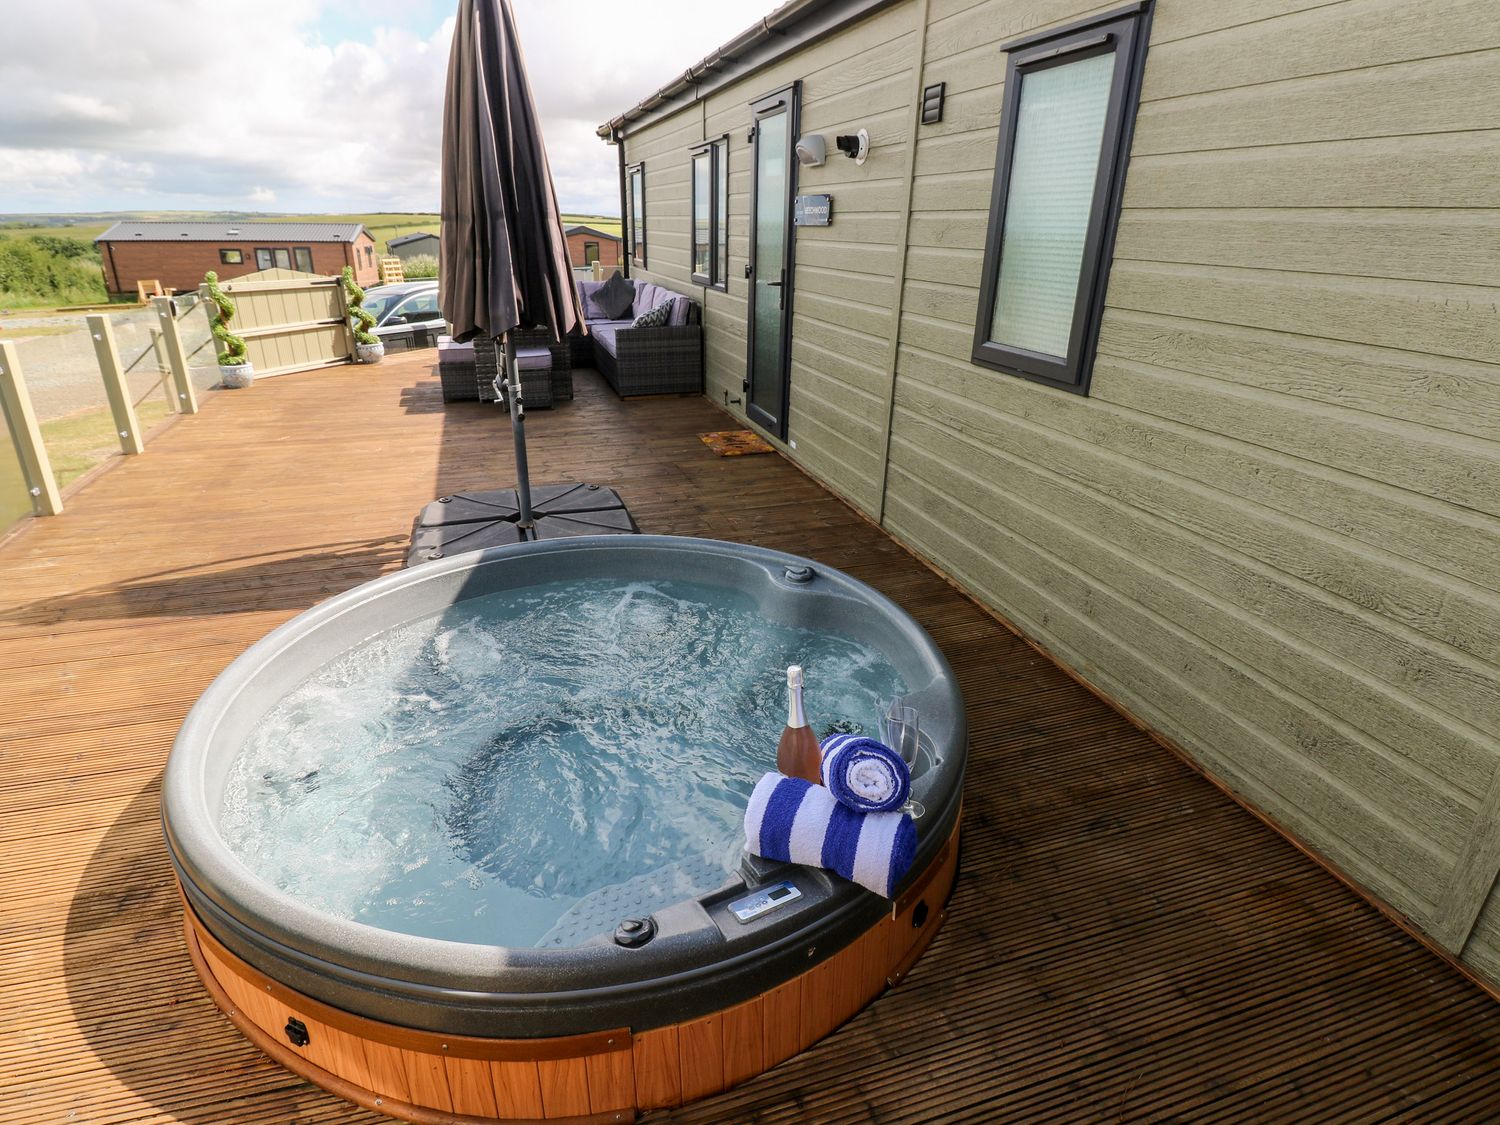 Beechwood Lodge, Hasguard Cross, Broad Haven, Pembrokeshire. Hot tub. In a National Park. Open plan.